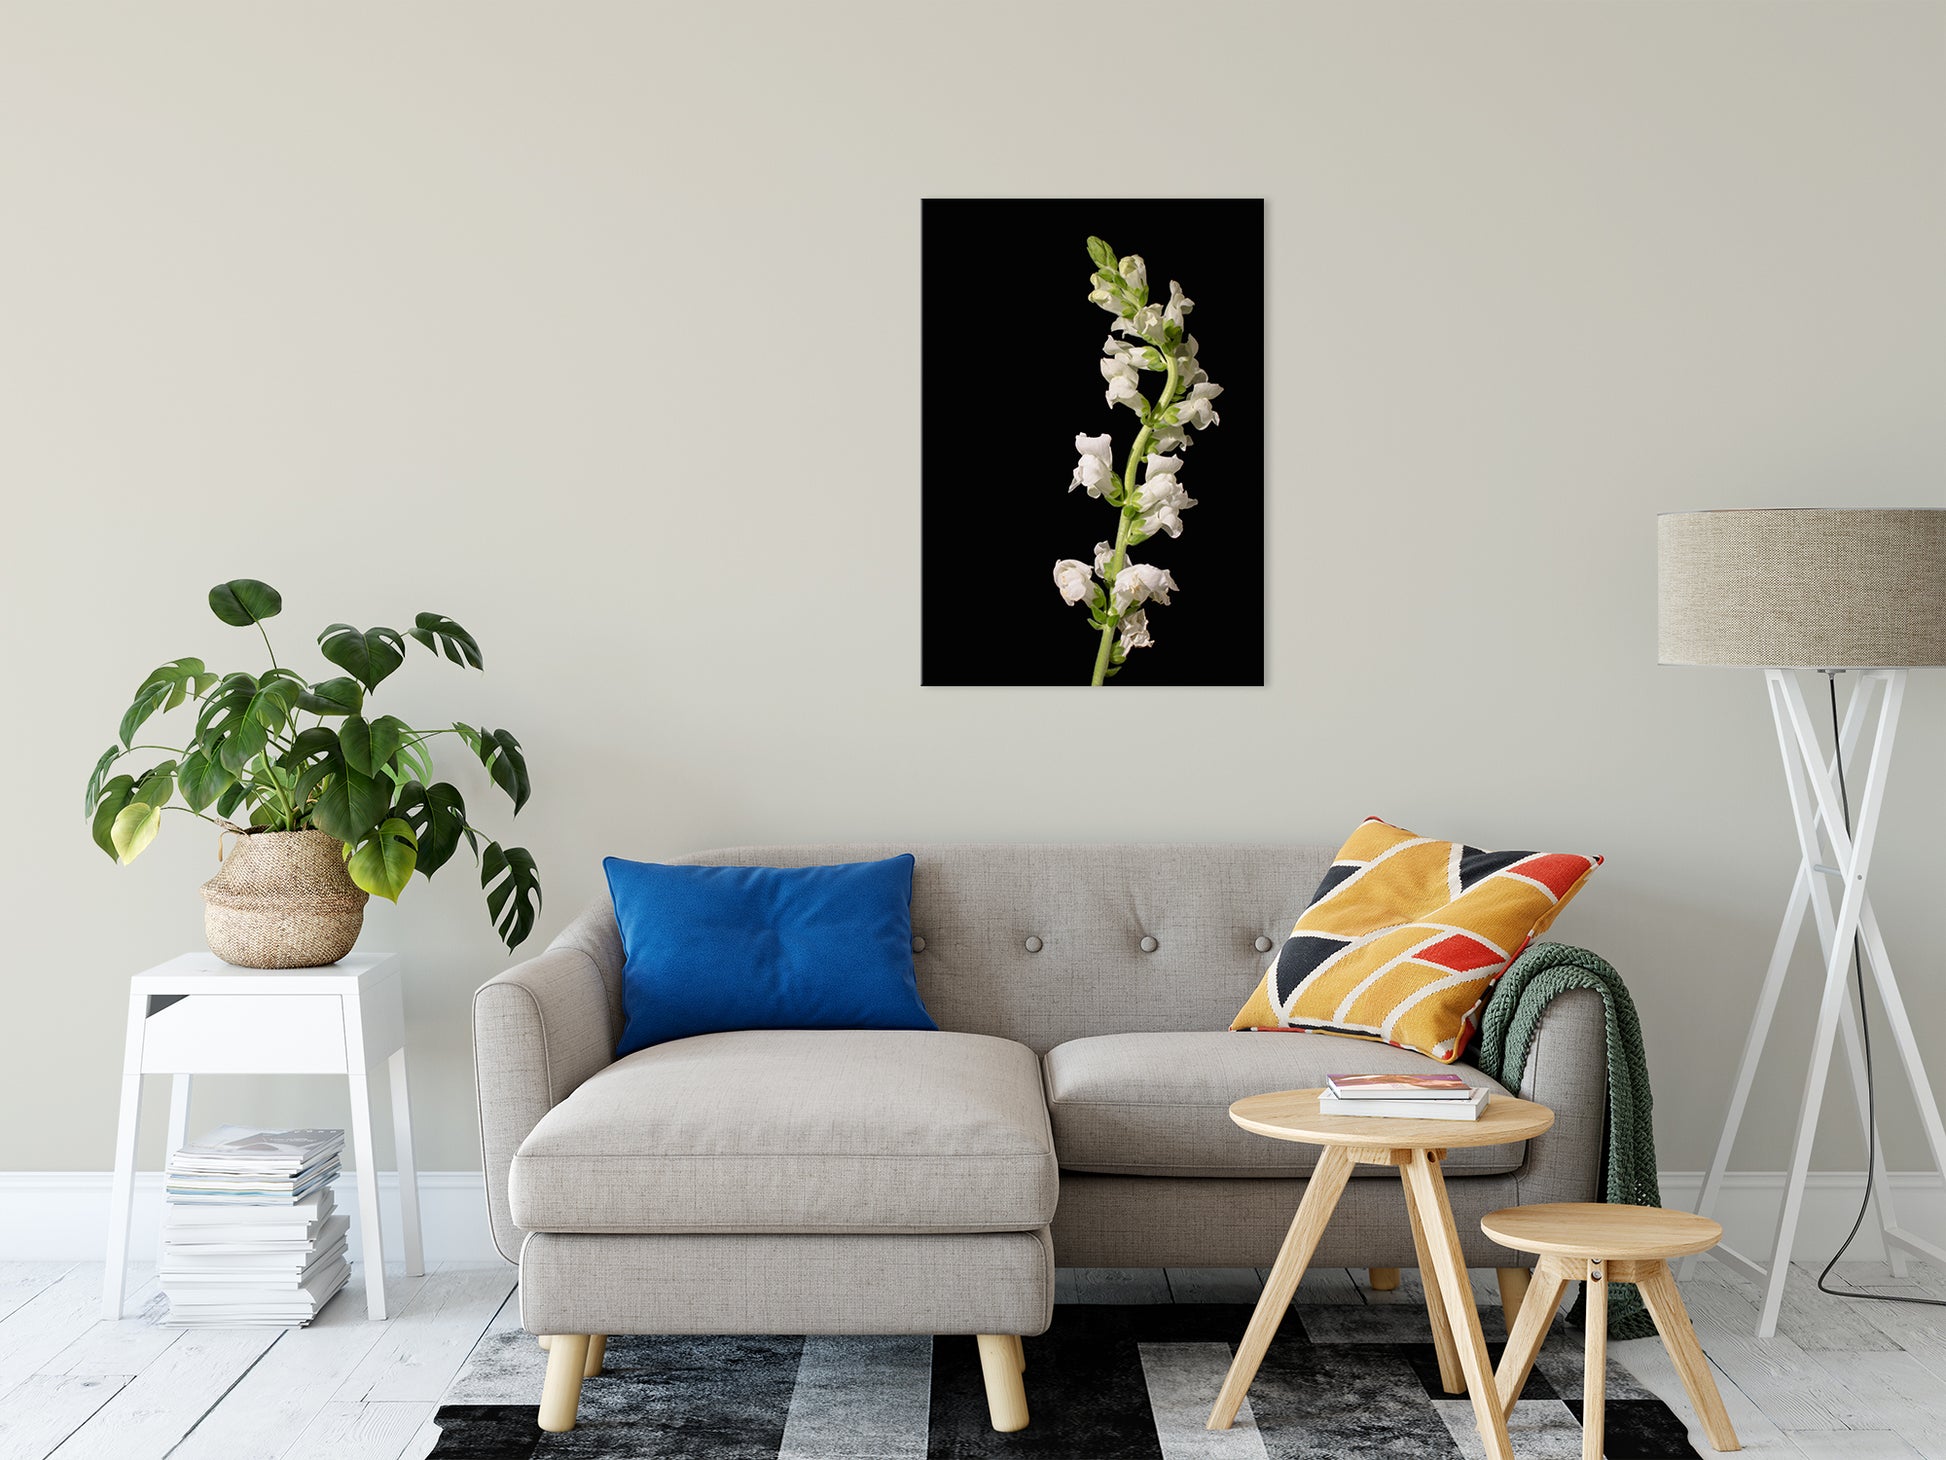 White Snapdragons Against Black Nature / Floral Photo Fine Art Canvas Wall Art Prints 24" x 36" - PIPAFINEART